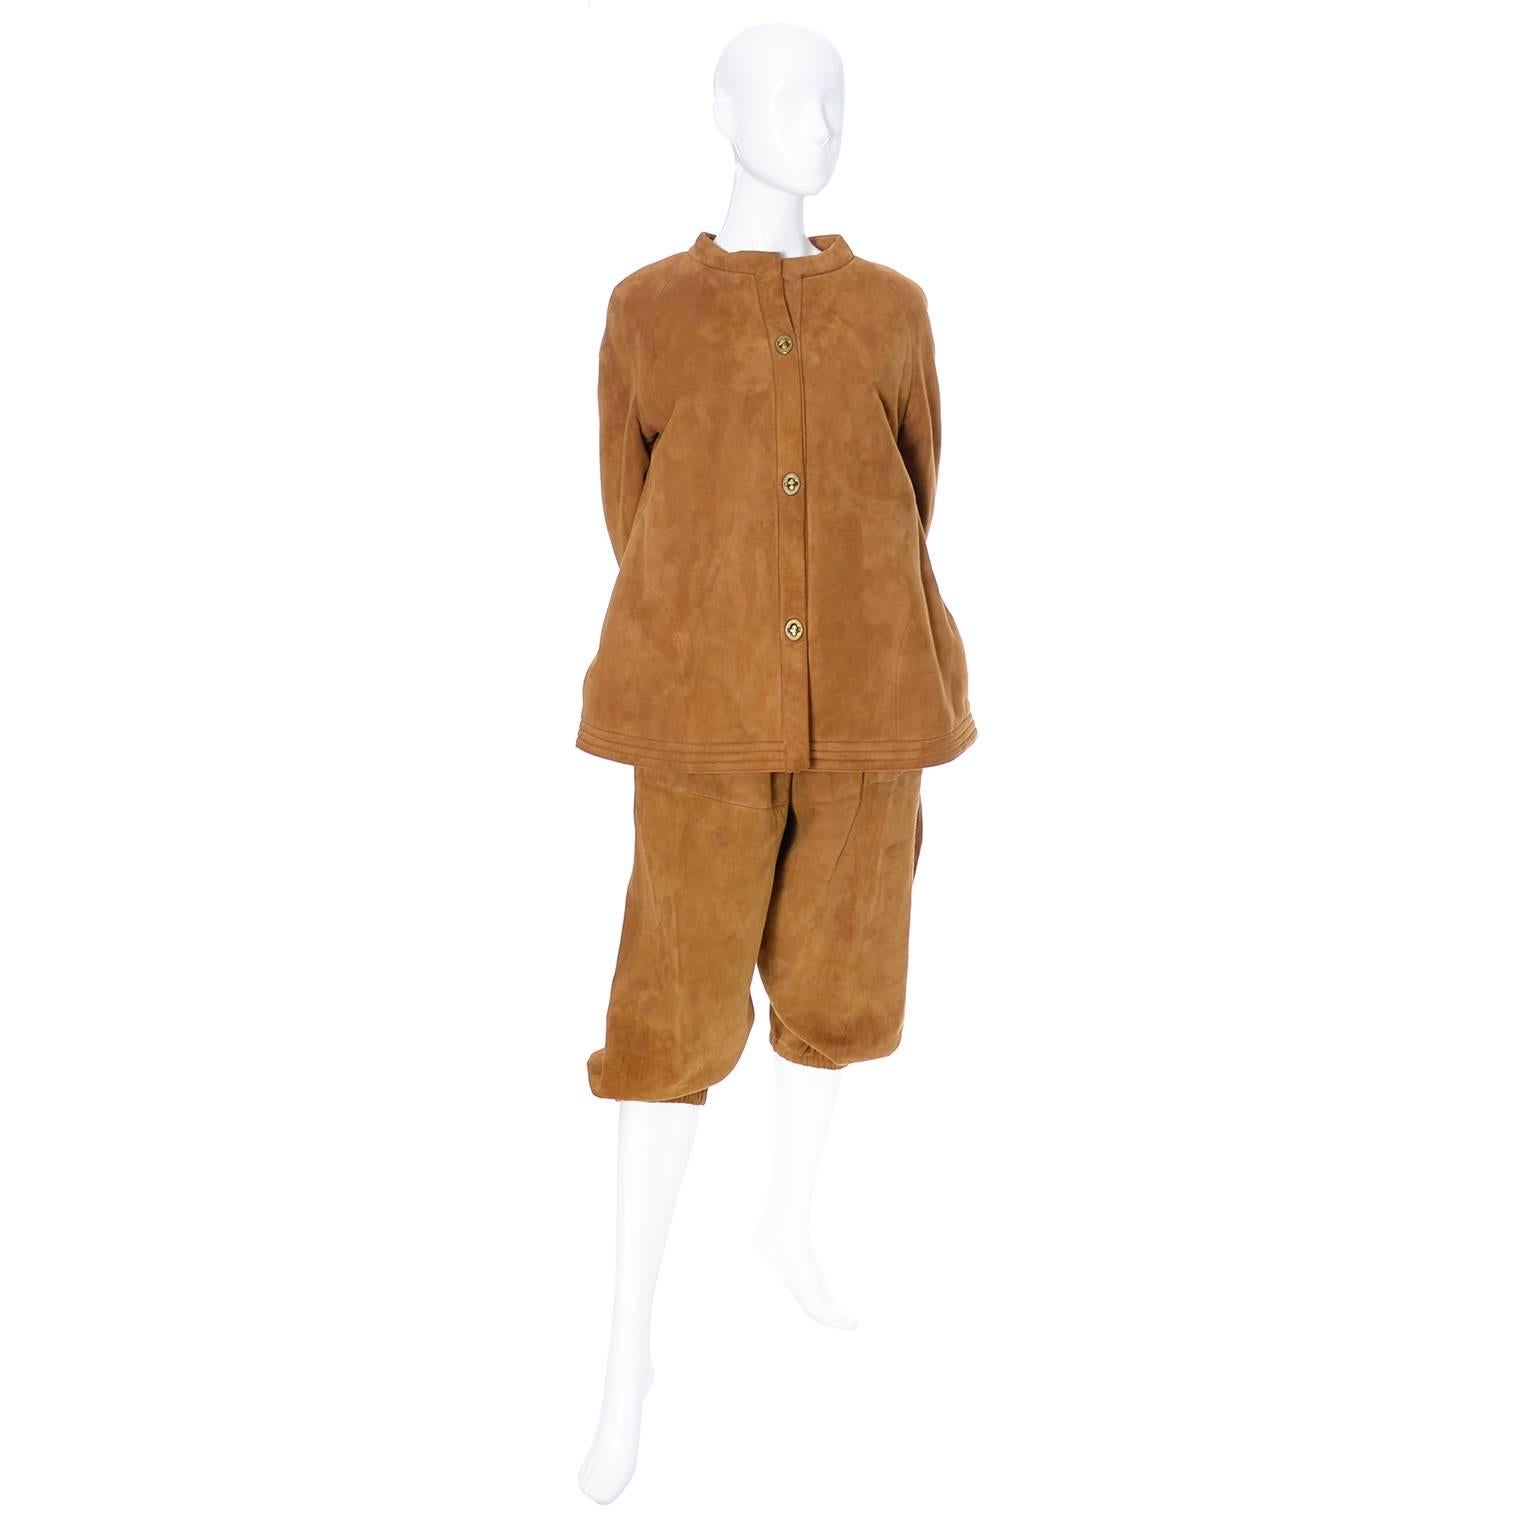 Vintage Bonnie Cashin Sills caramel brown suede outfit with knickers, jacket and original belt.  The jacket is lined with faux sheepskin and has Cashin's signature toggle closures and side slit pockets.  The knickers have elastic at the hem and the